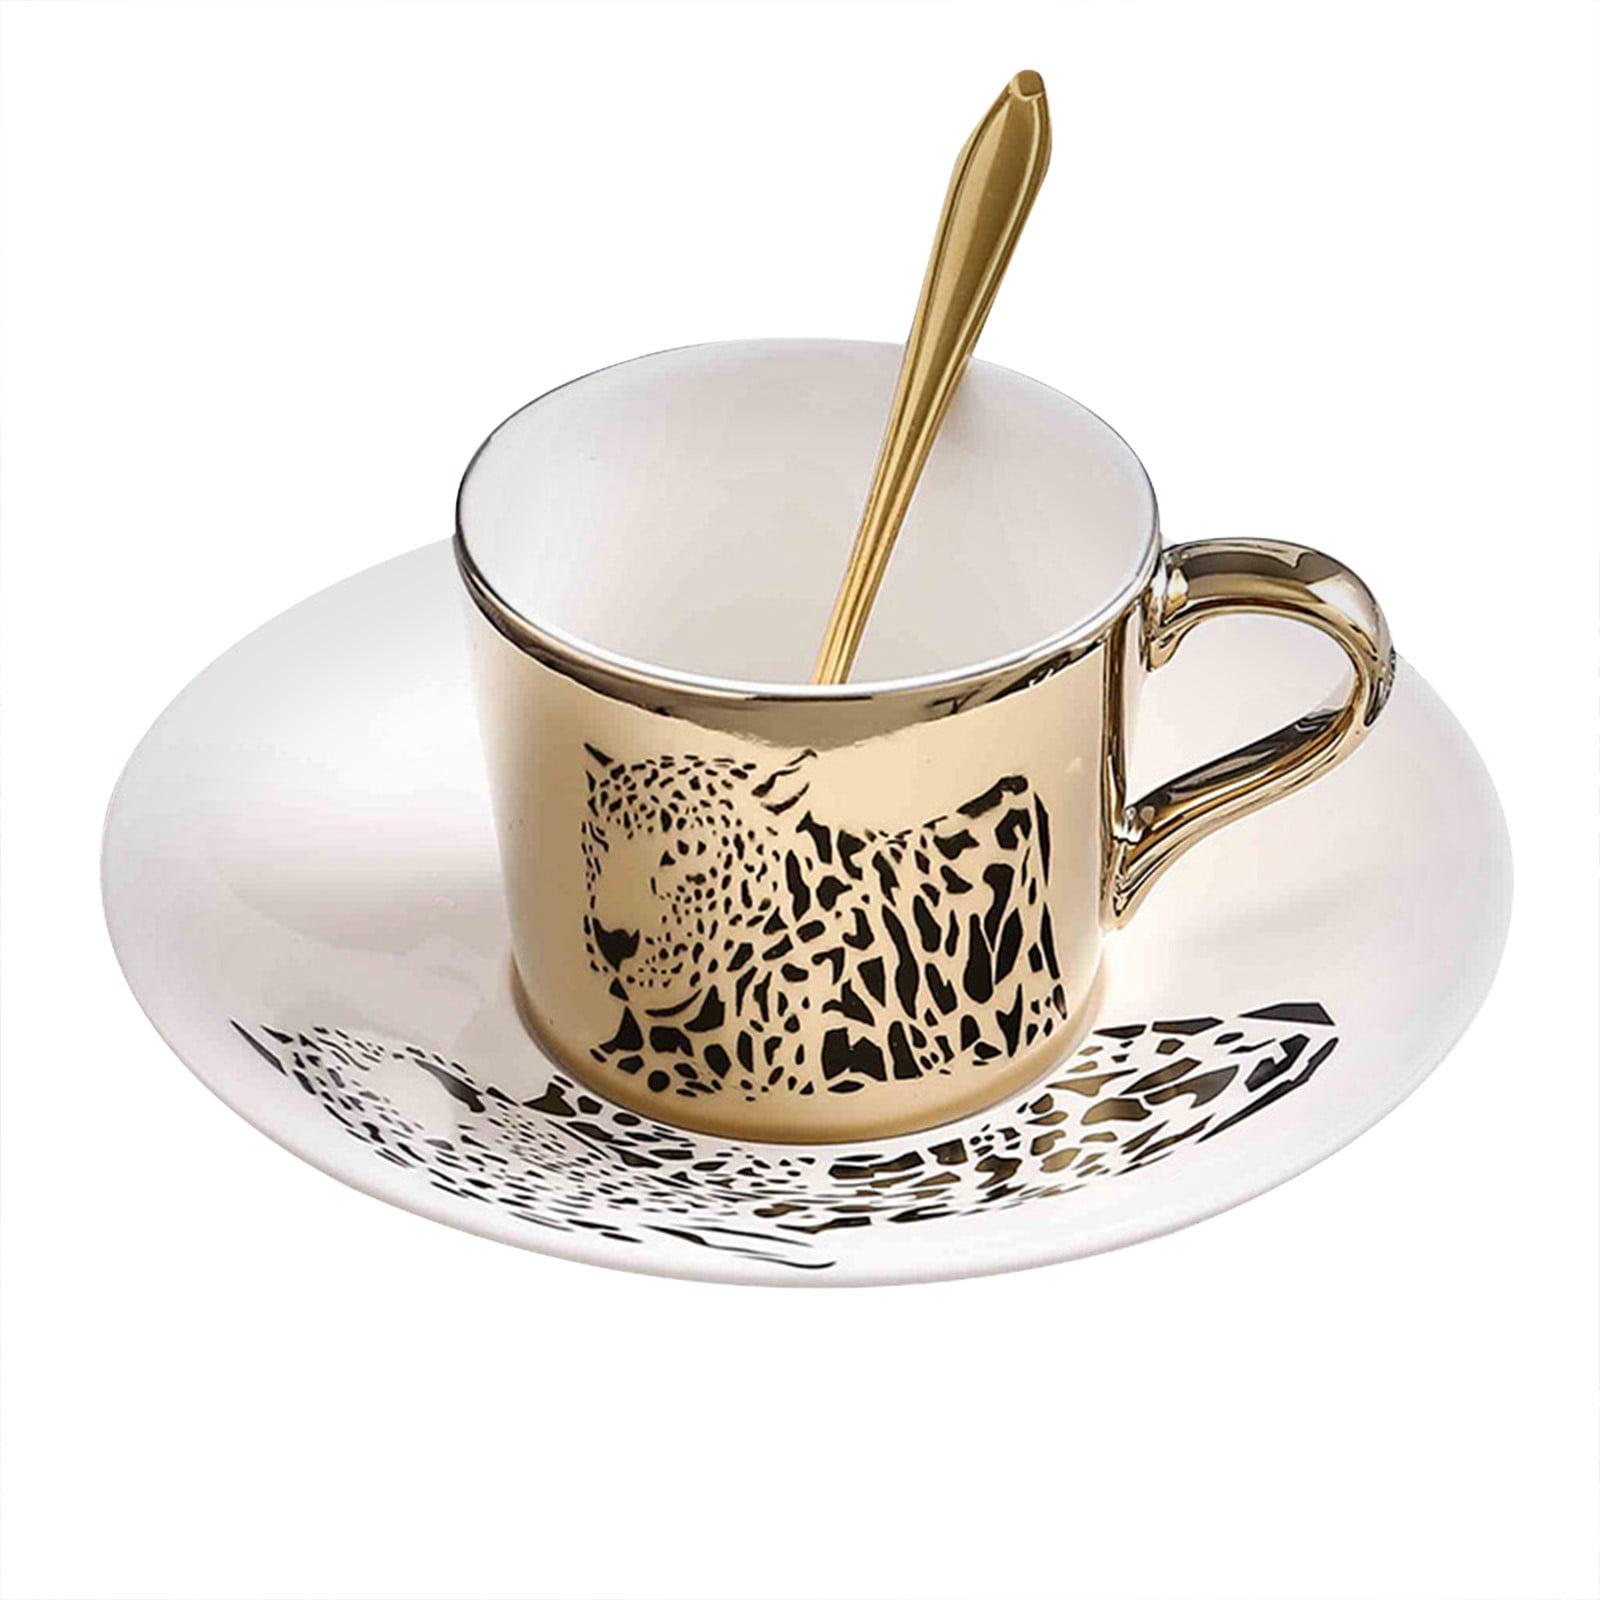 Reflection coffee cup with plate cool cups and mugs creative mark drinkware